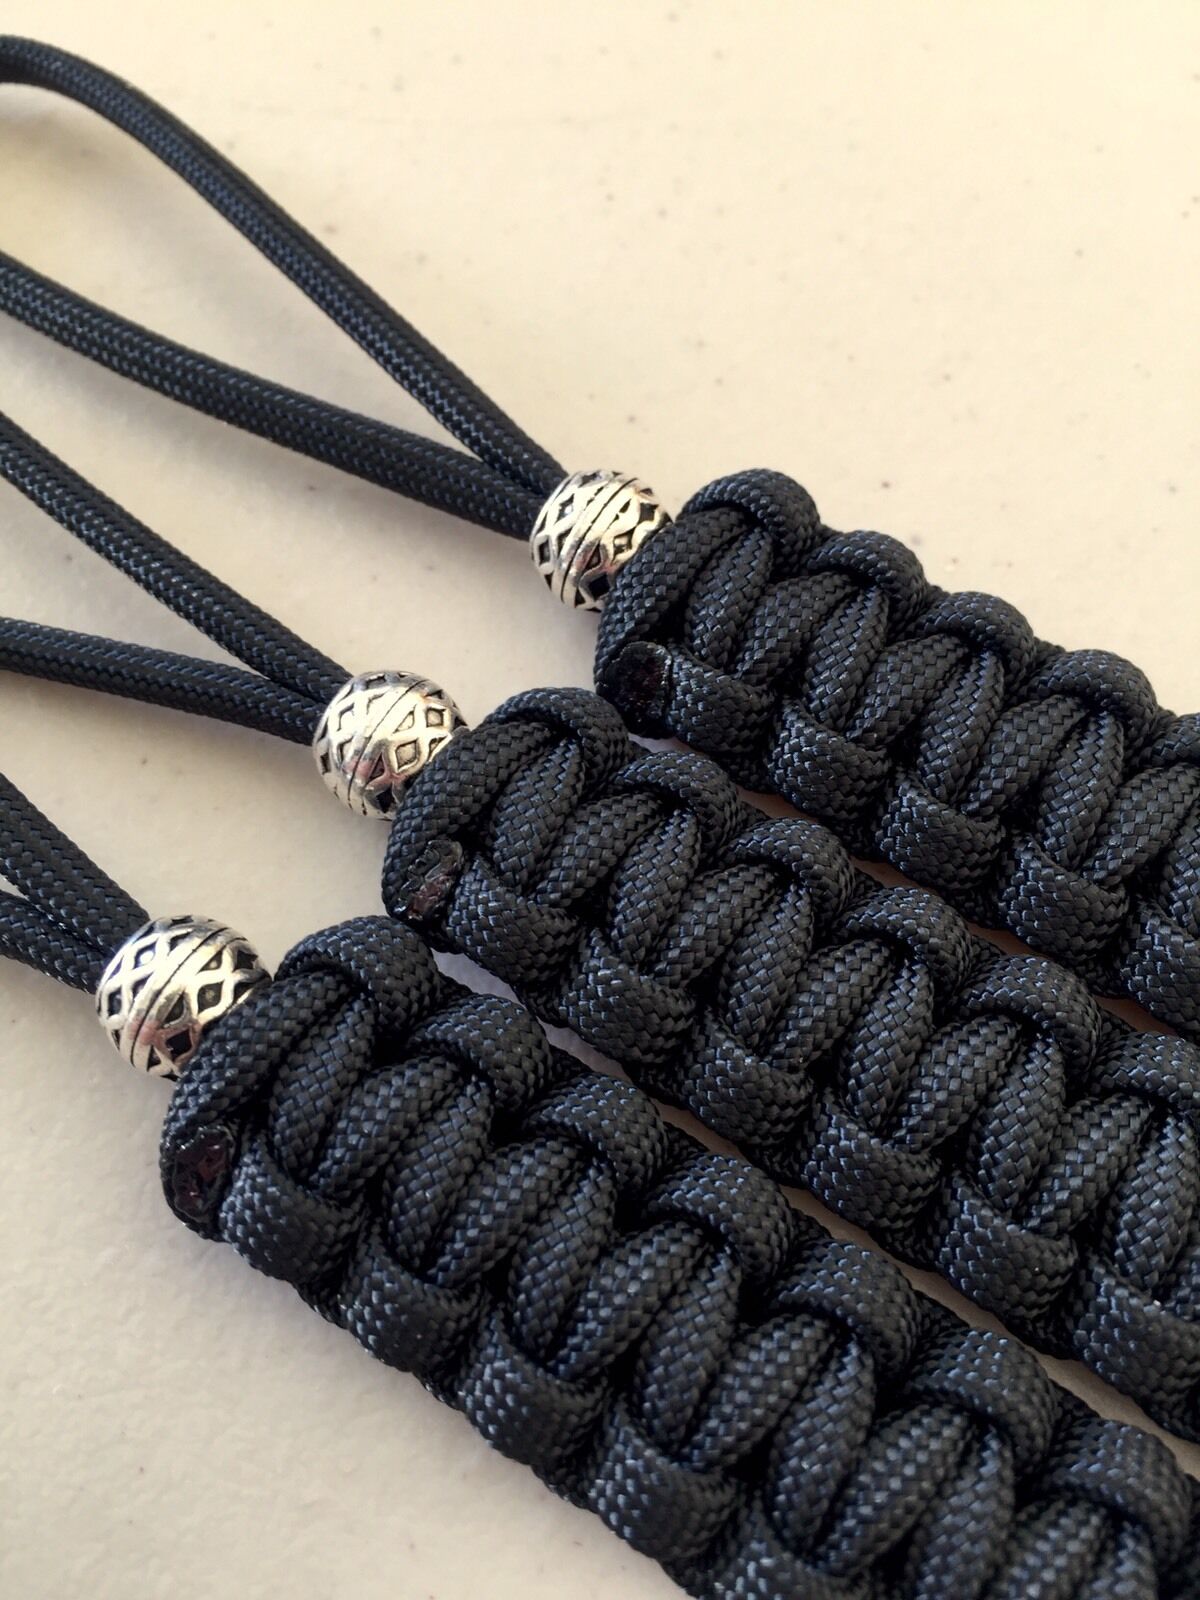 550 Paracord Knife Lanyard Jet Black Cord 3 Pk Non-gutted